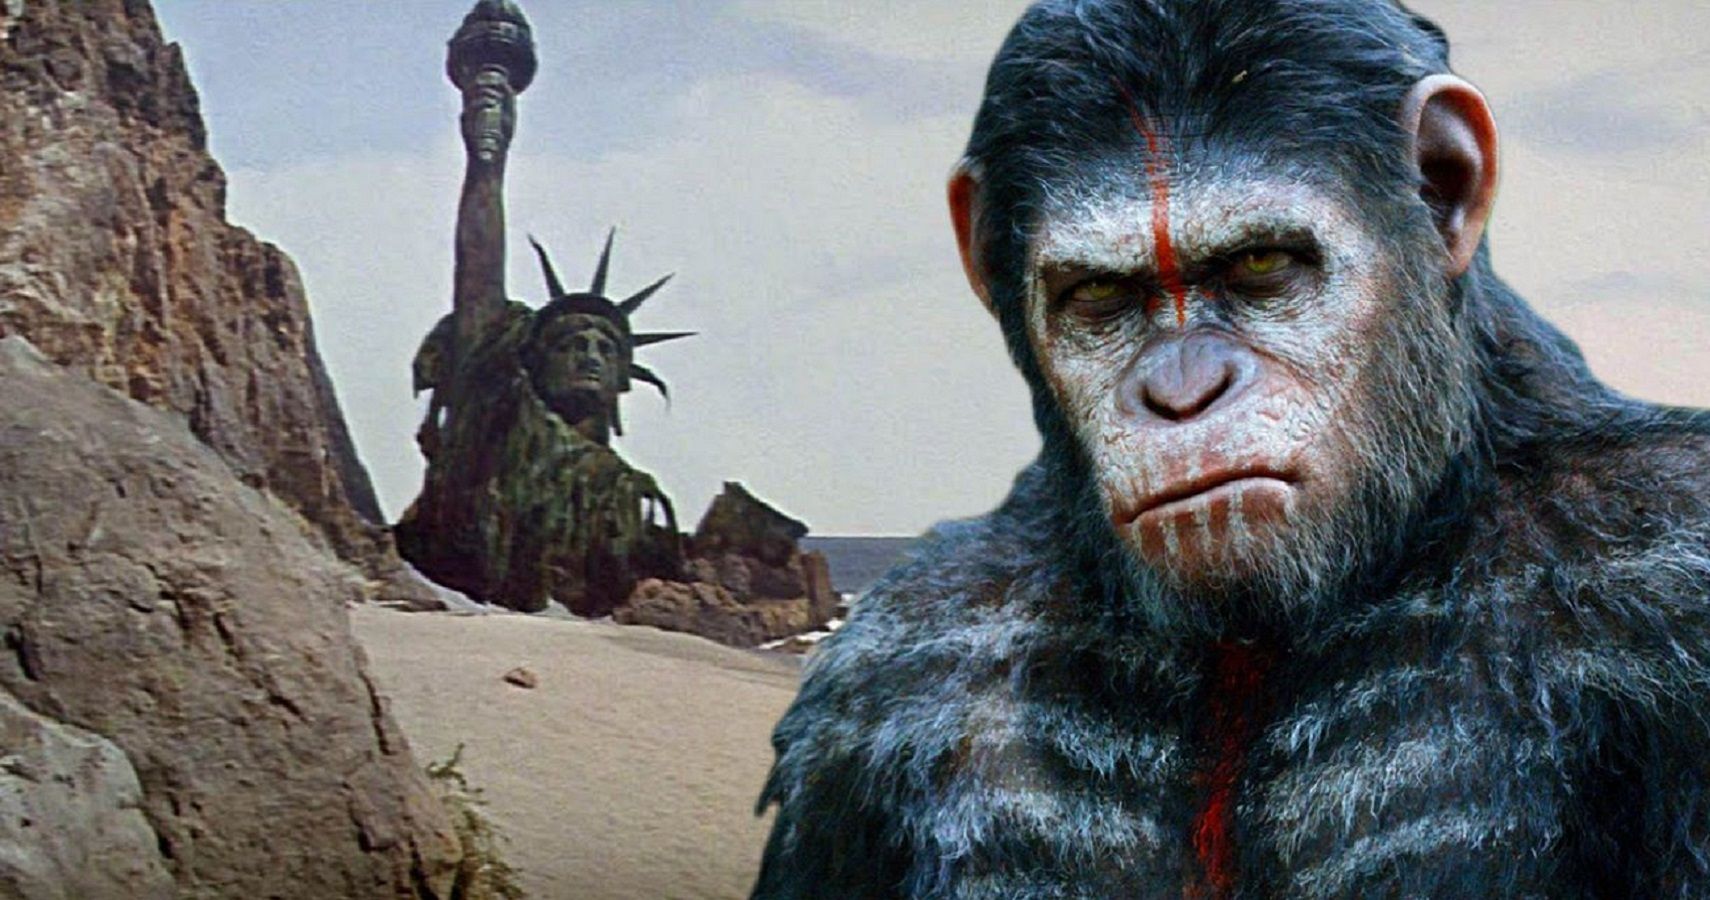 Of The Apes Plot